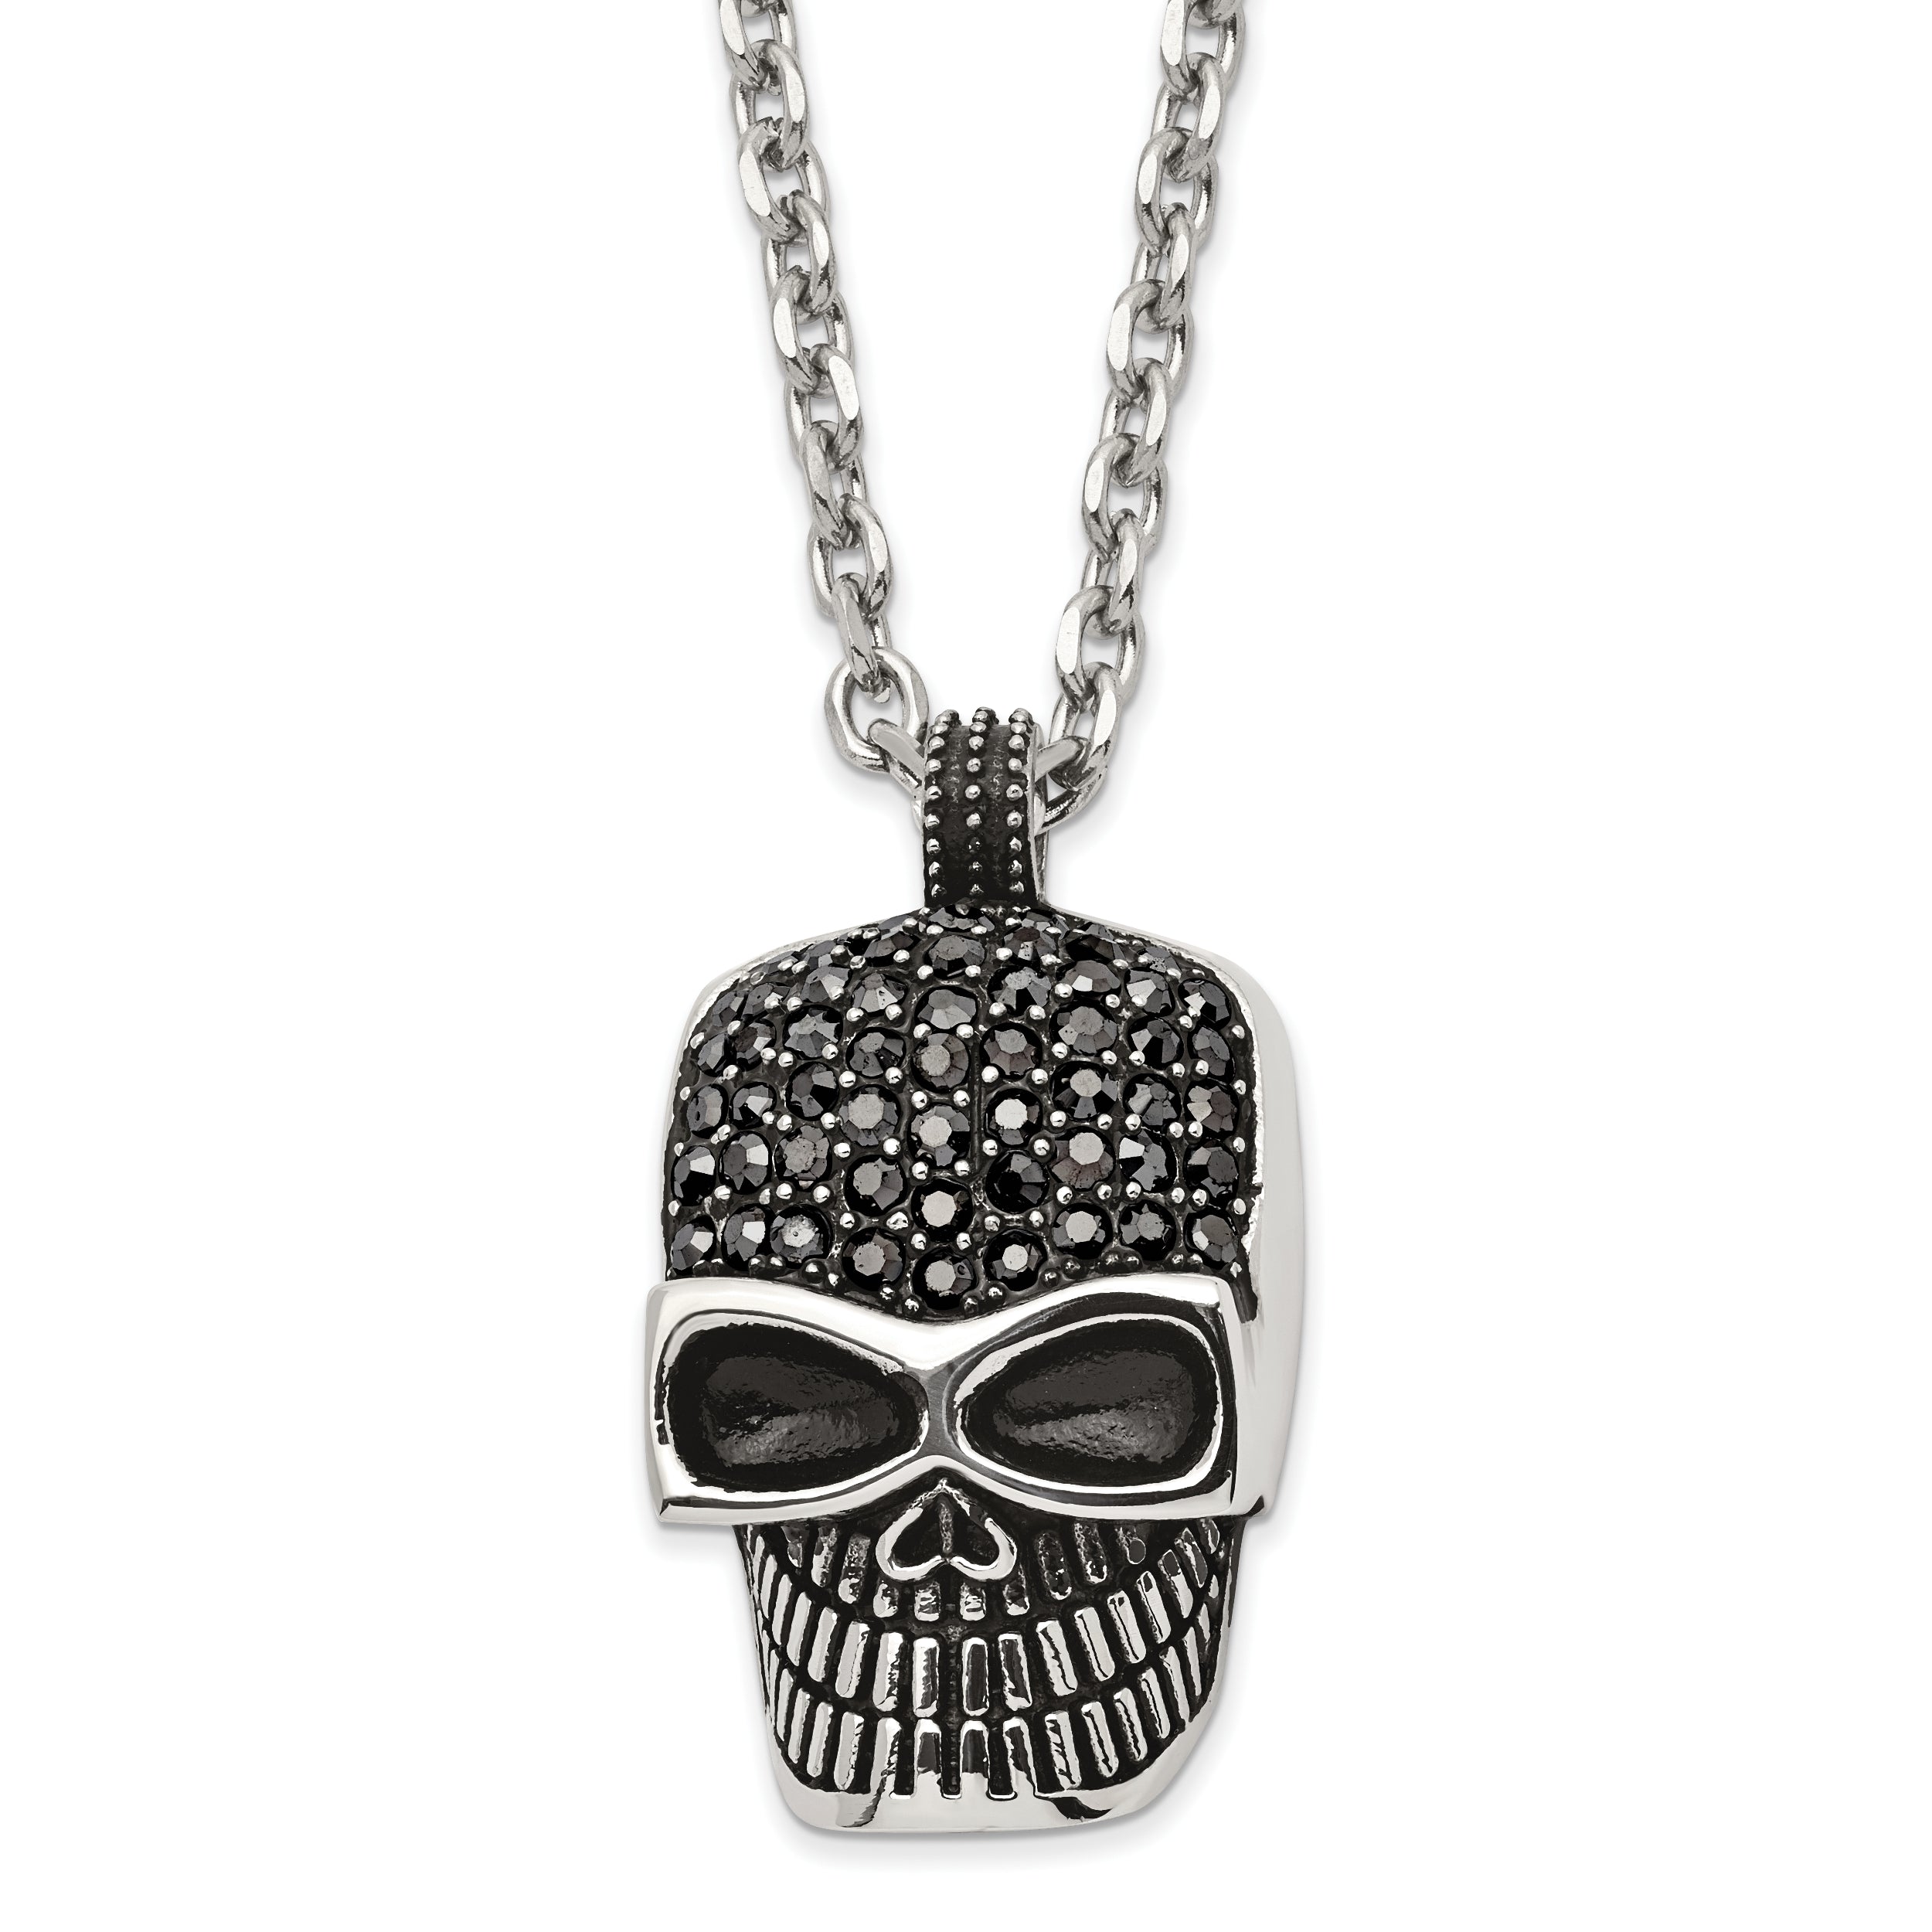 Chisel Stainless Steel Polished and Antiqued with Black Crystal Skull Pendant on a 25.5 inch Cable Chain Necklace